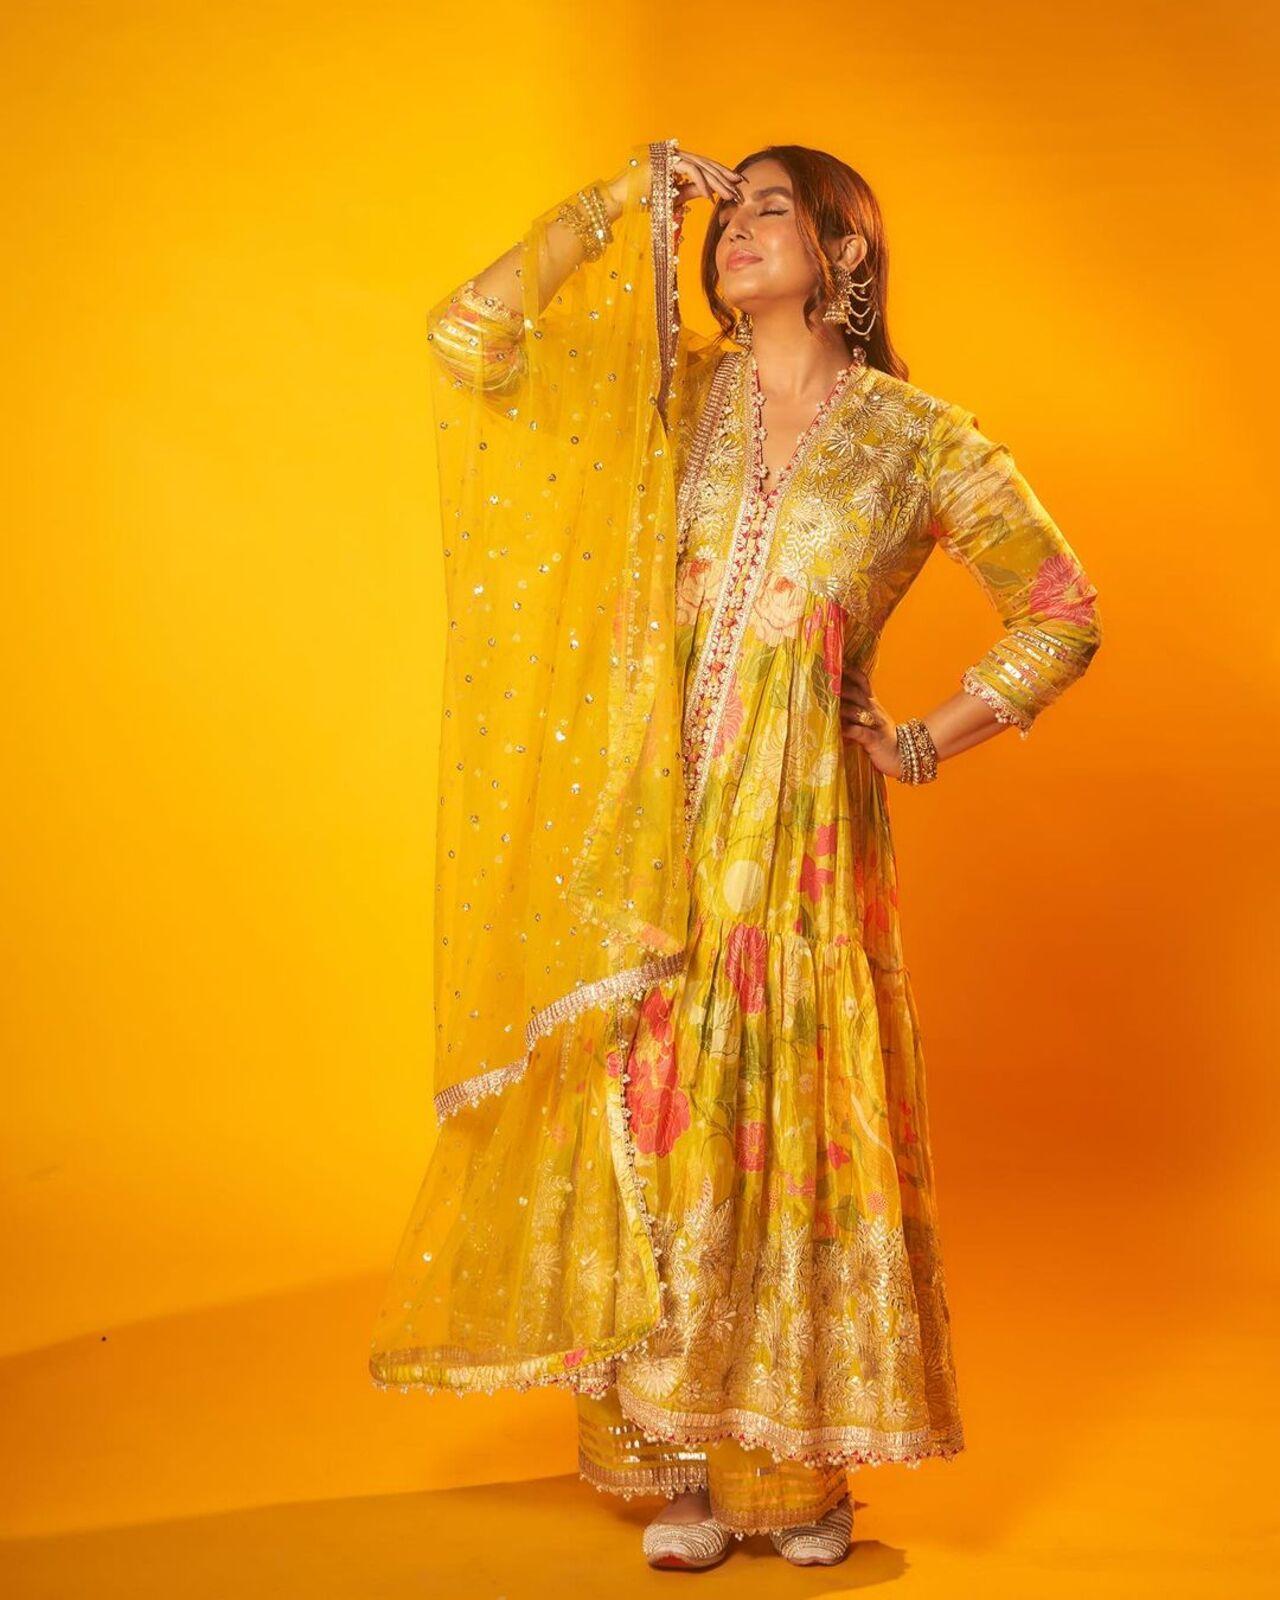 Huma Qureshi shared a string of pictures of herself dressed in a yellow suit wishing all on Eid